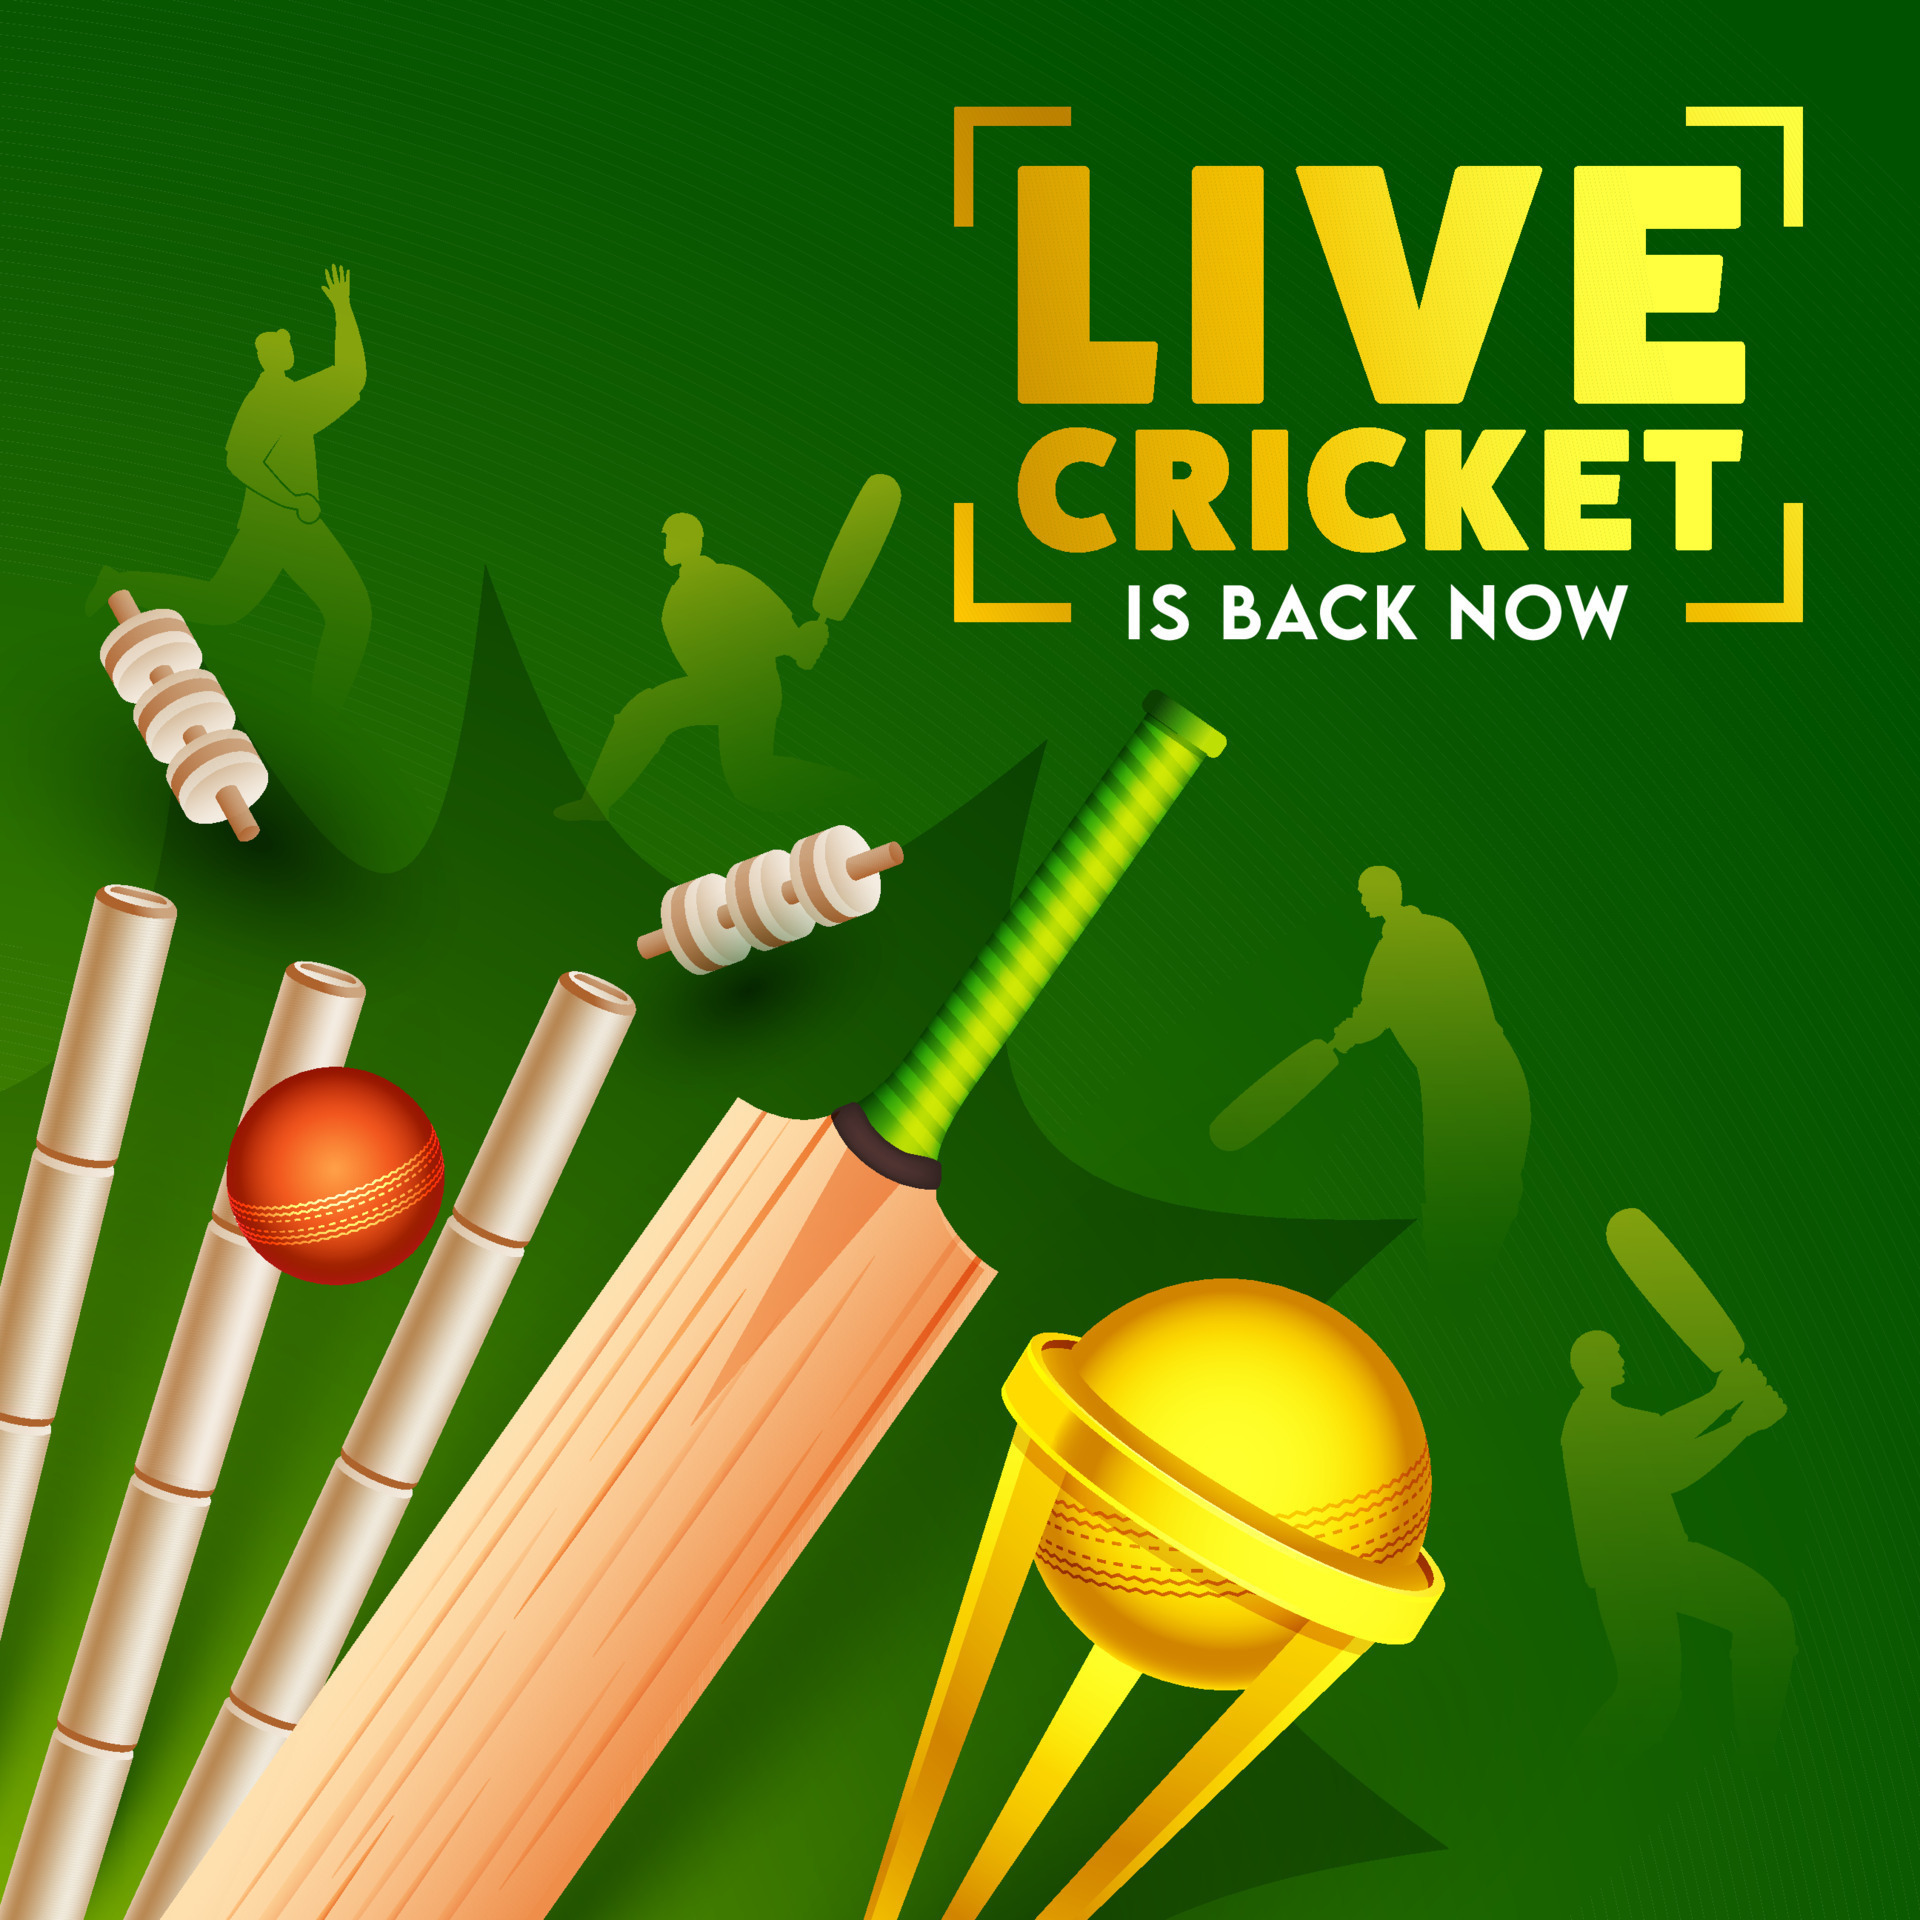 Live Cricket Is Back Now Poster Design with Realistic Bat, Ball Hitting Wickets on Green Silhouette Players Background